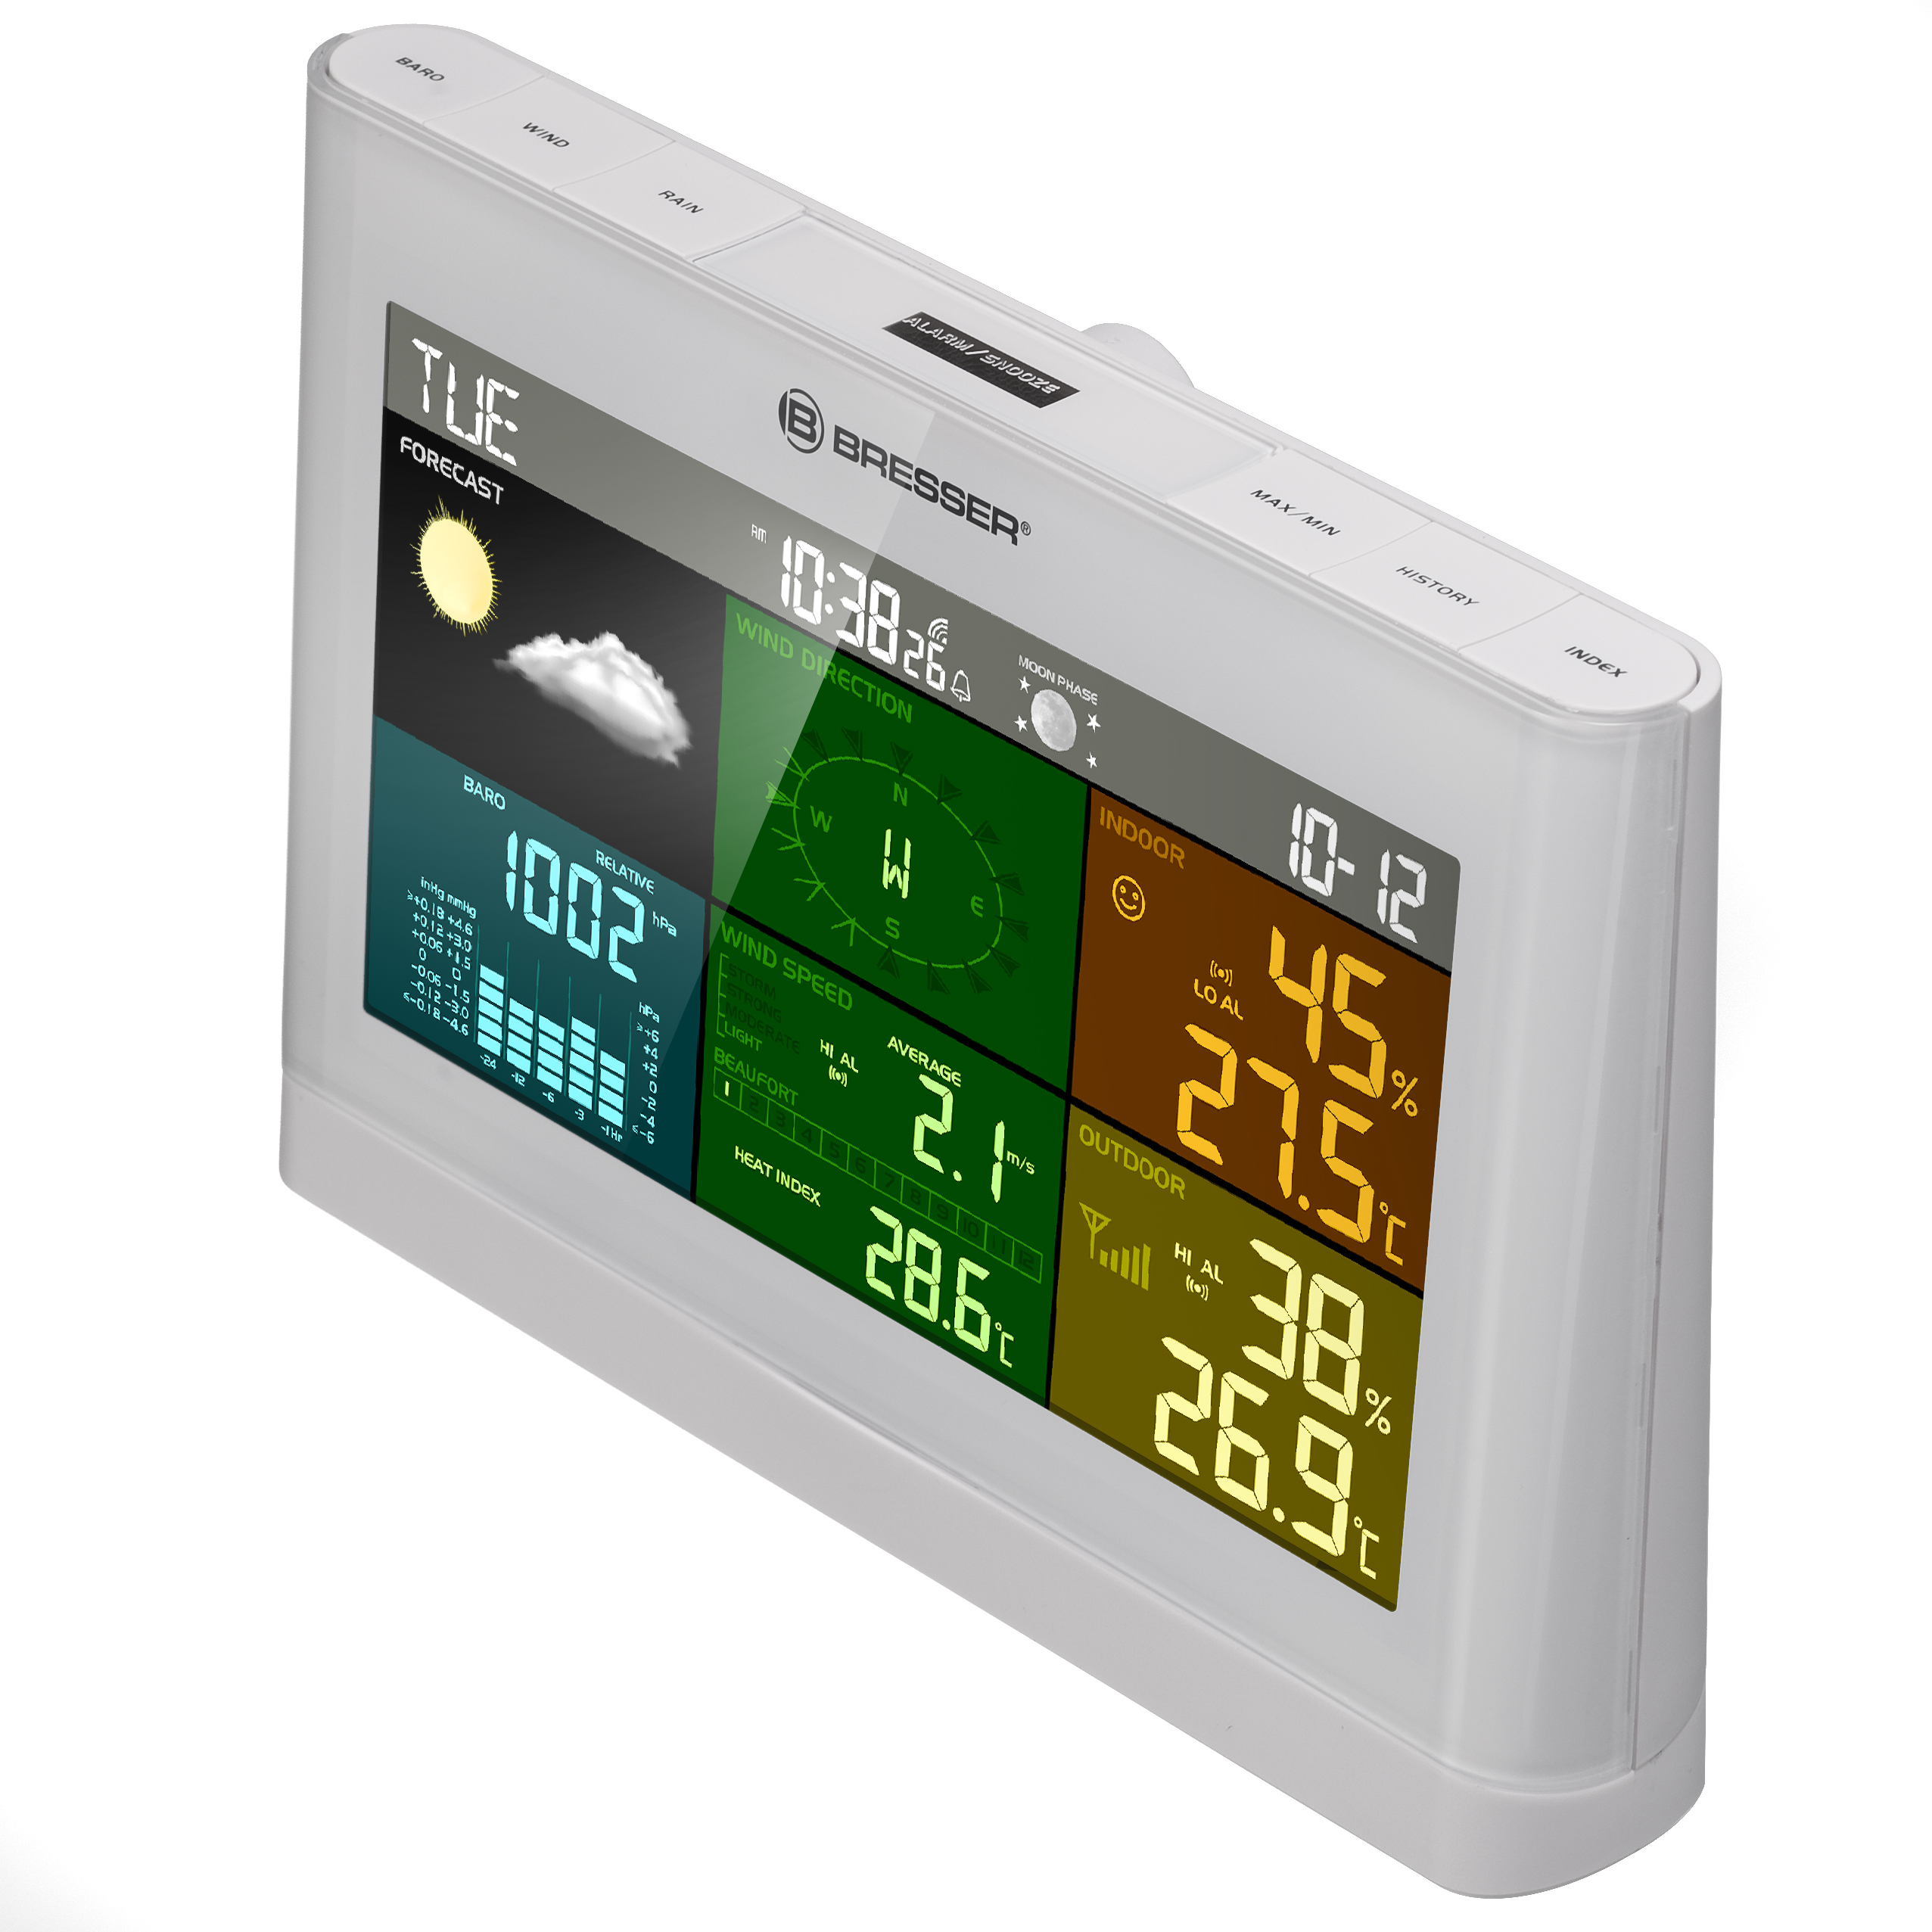 BRESSER 5-in-1 Comfort Weather Station with Colour Display | white ...